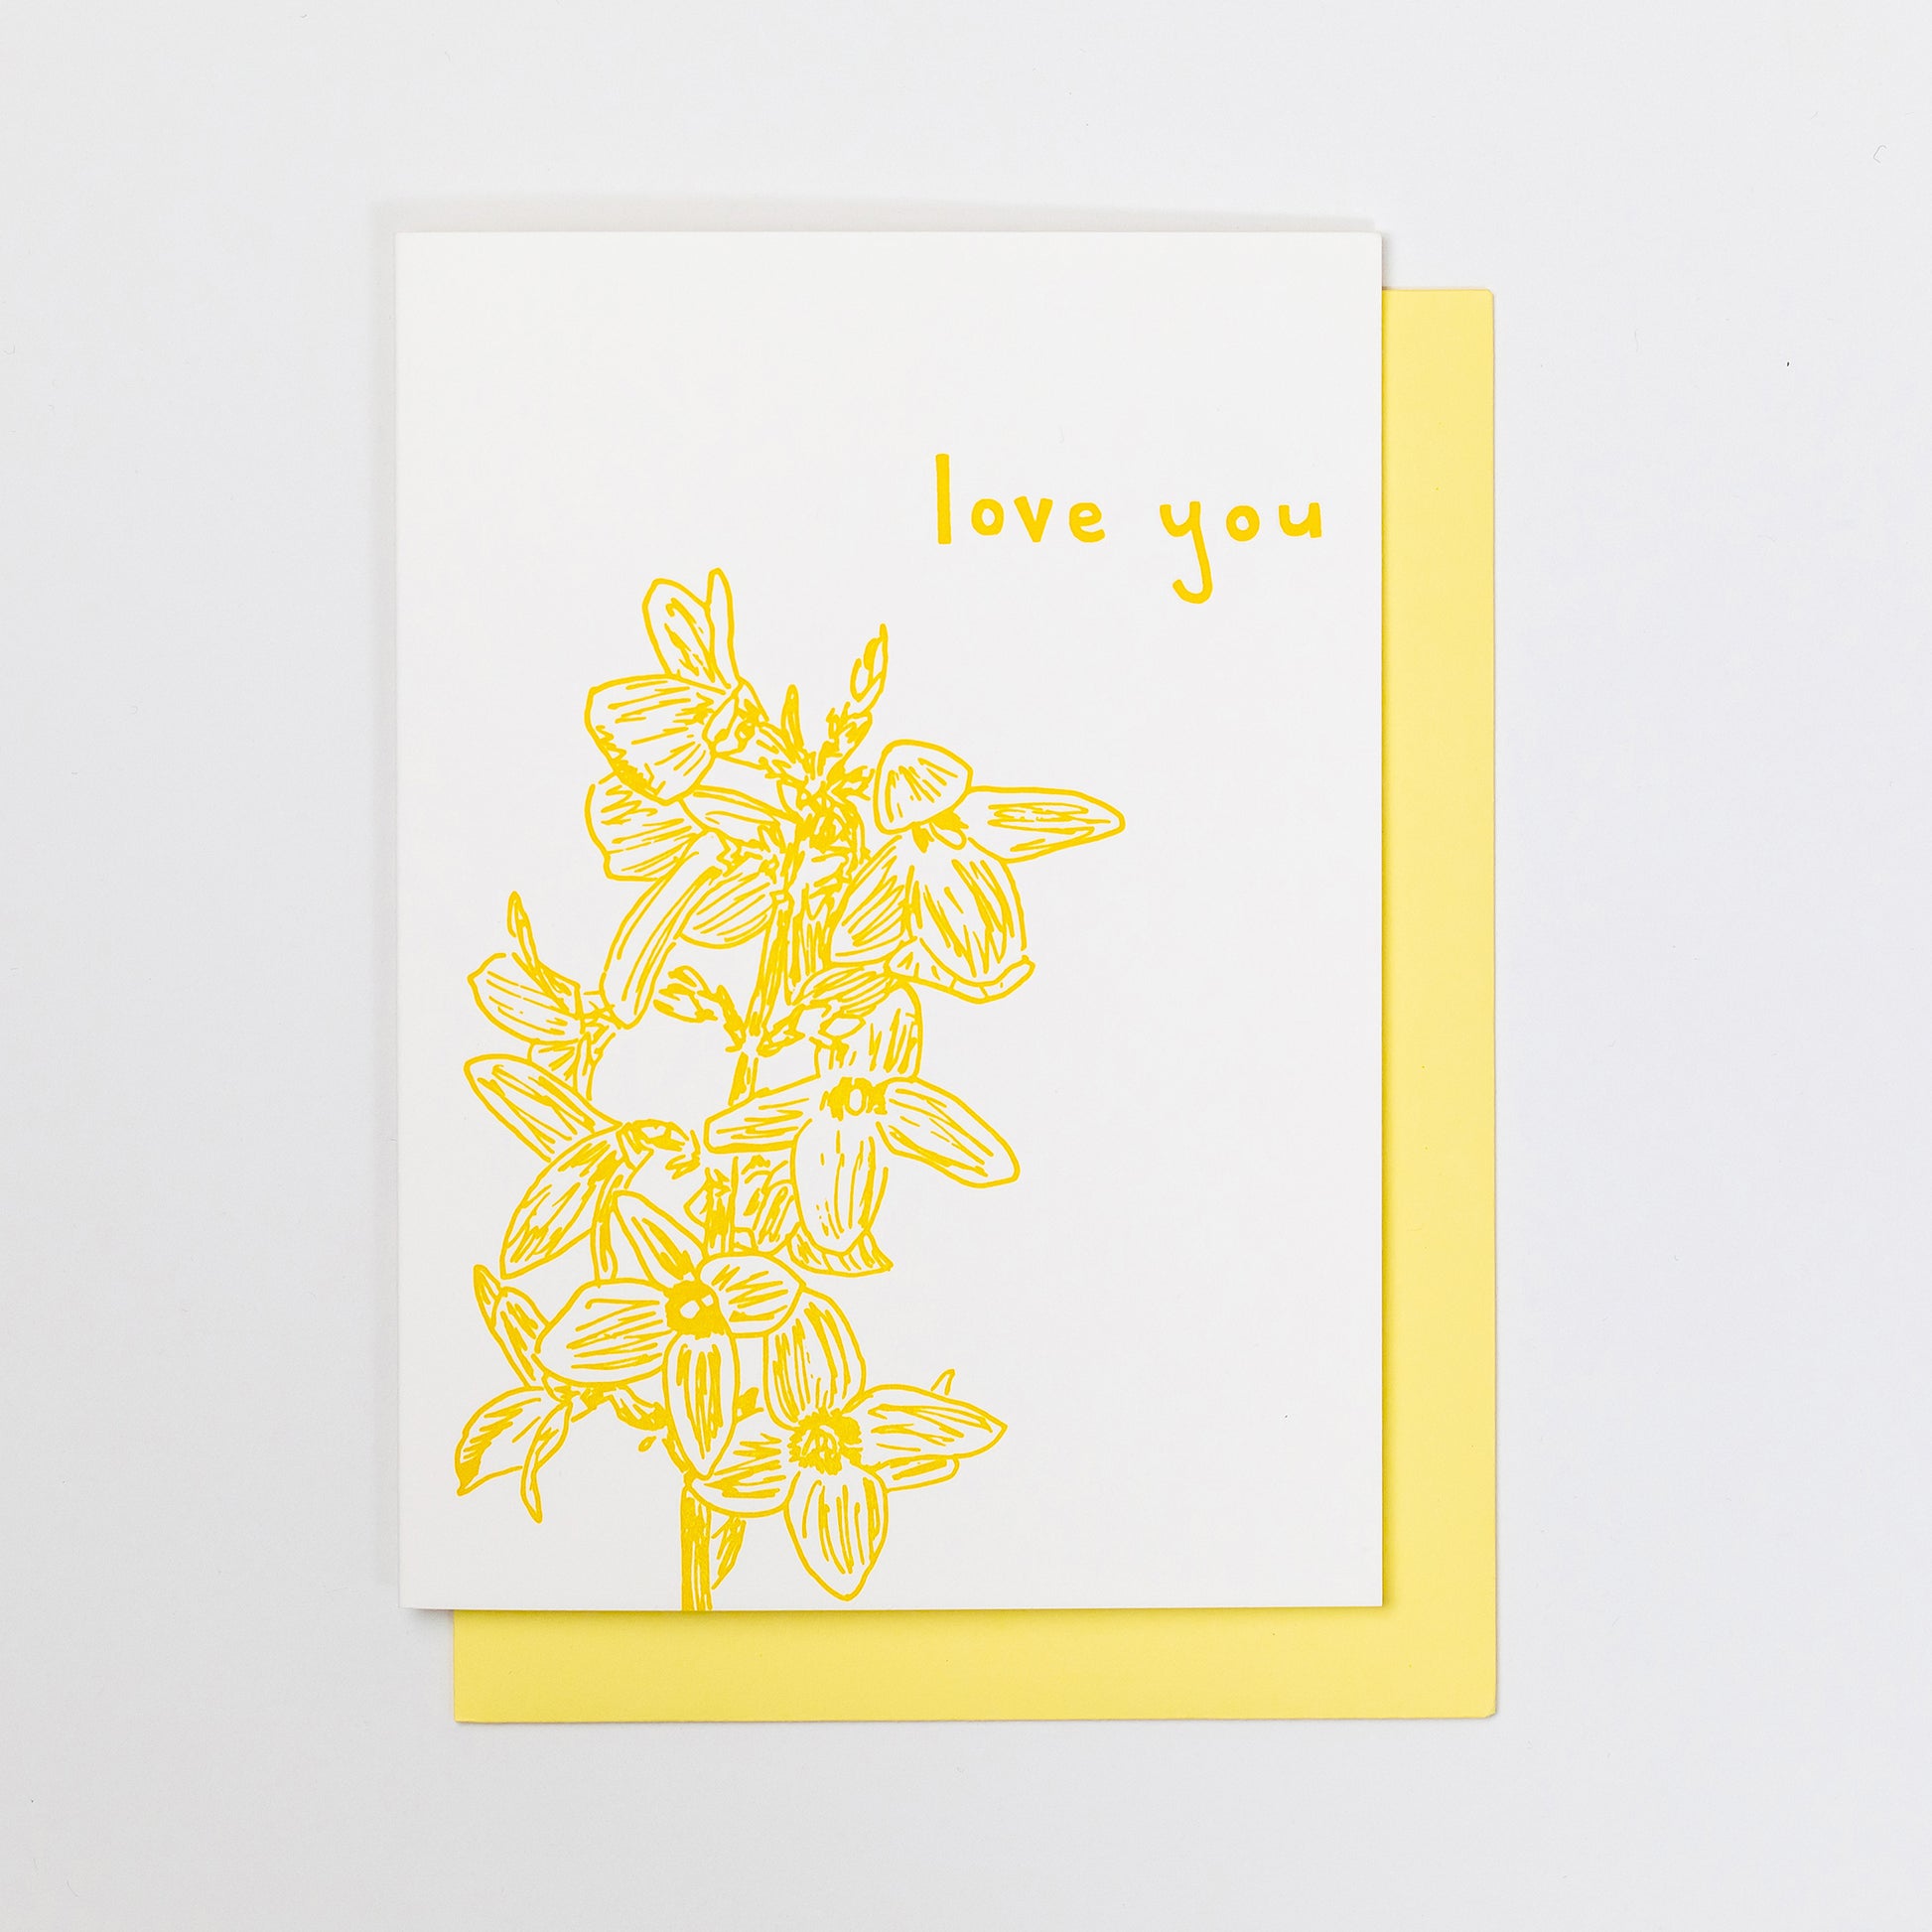 Letterpress greeting card featuring hand-drawn forsythia branches, printed in an vibrant golden ink. Whimsical hand-drawn text saying "Love You" is shown on the top right corner of the card, in the same vibrant golden ink. The card is white, blank inside, and is paired with a light yellow envelope.